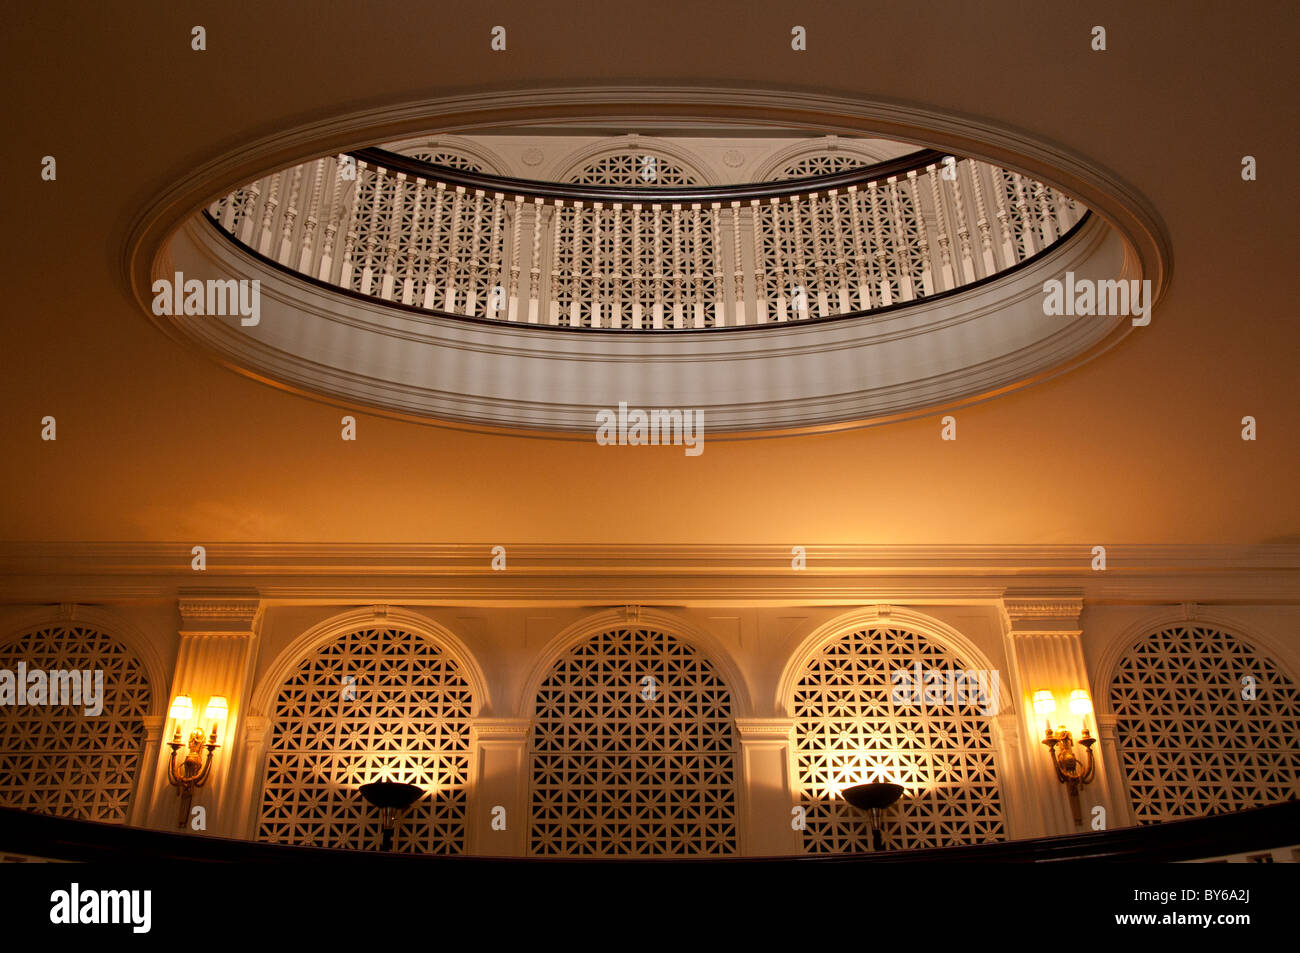 Circular skylight in old Historic mansion. Stock Photo